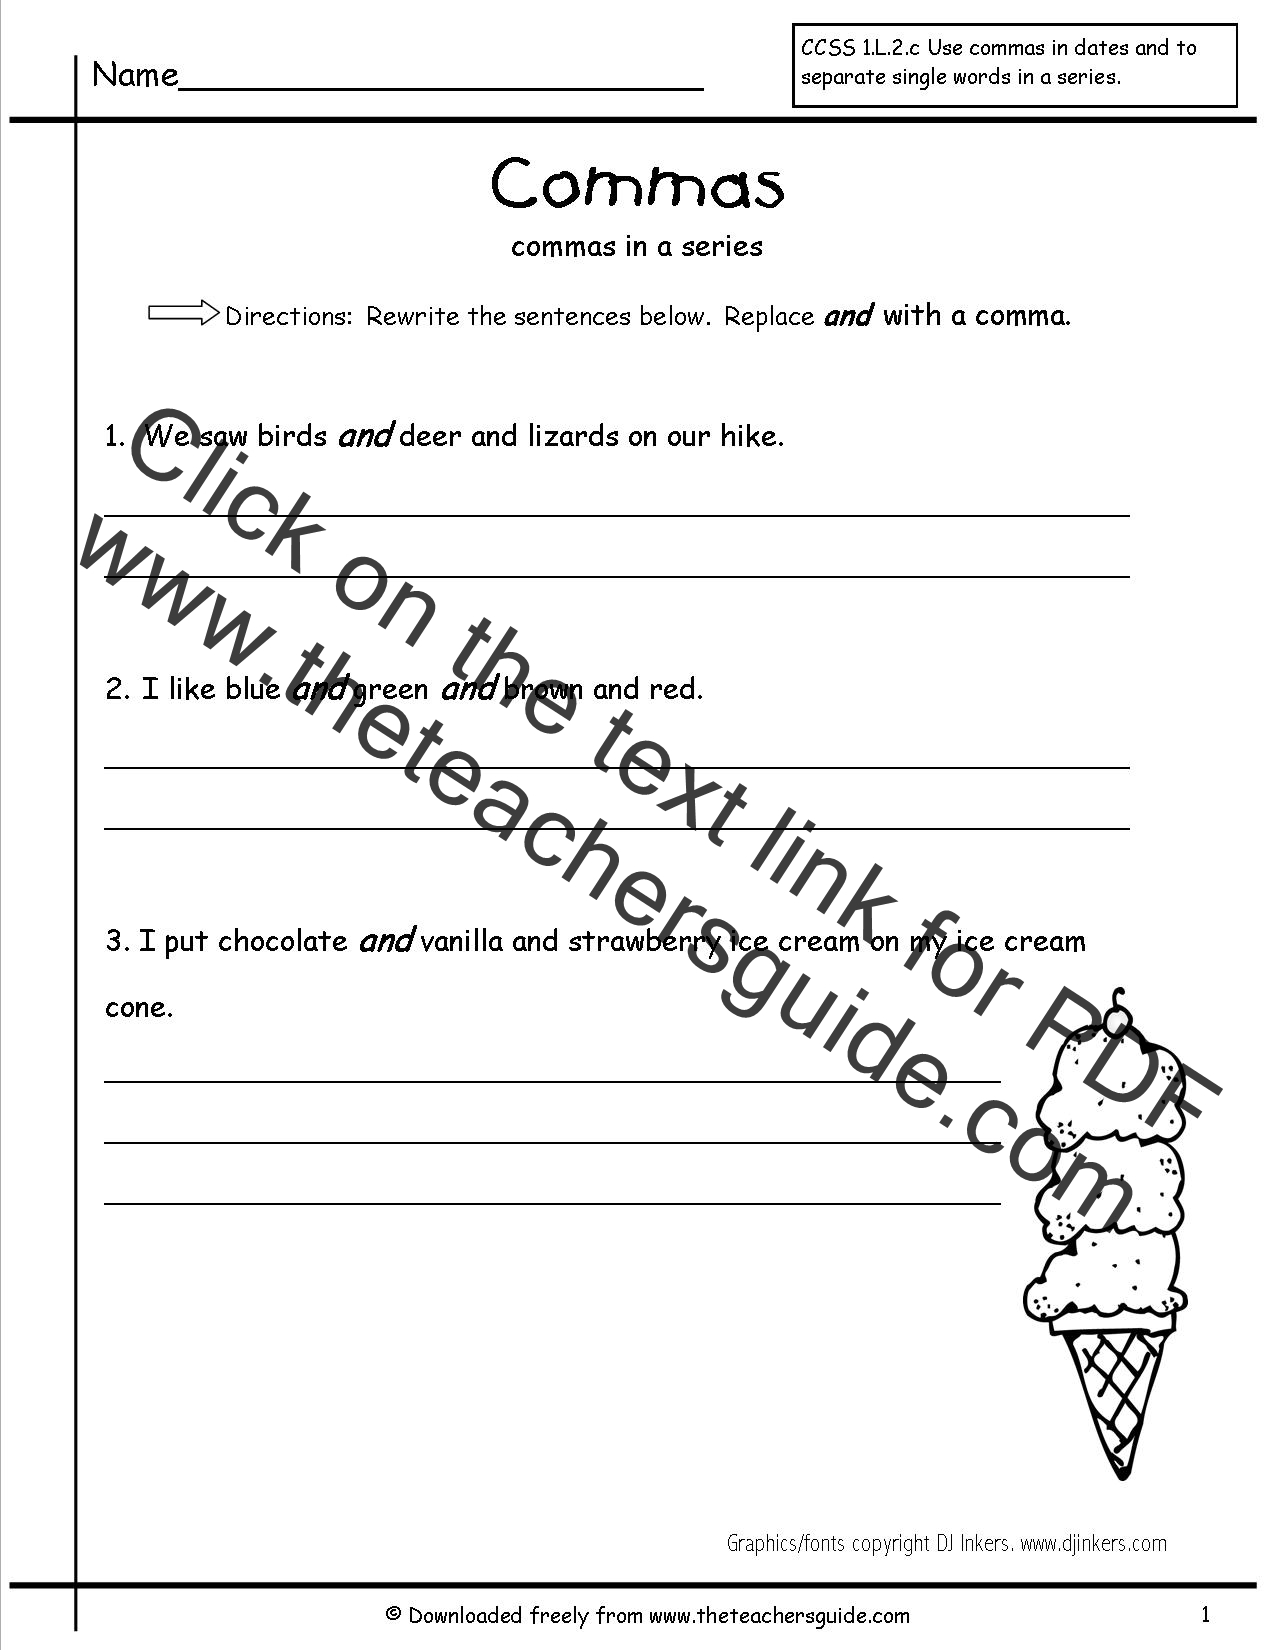 commas-with-conjunctions-worksheet-free-download-gambr-co